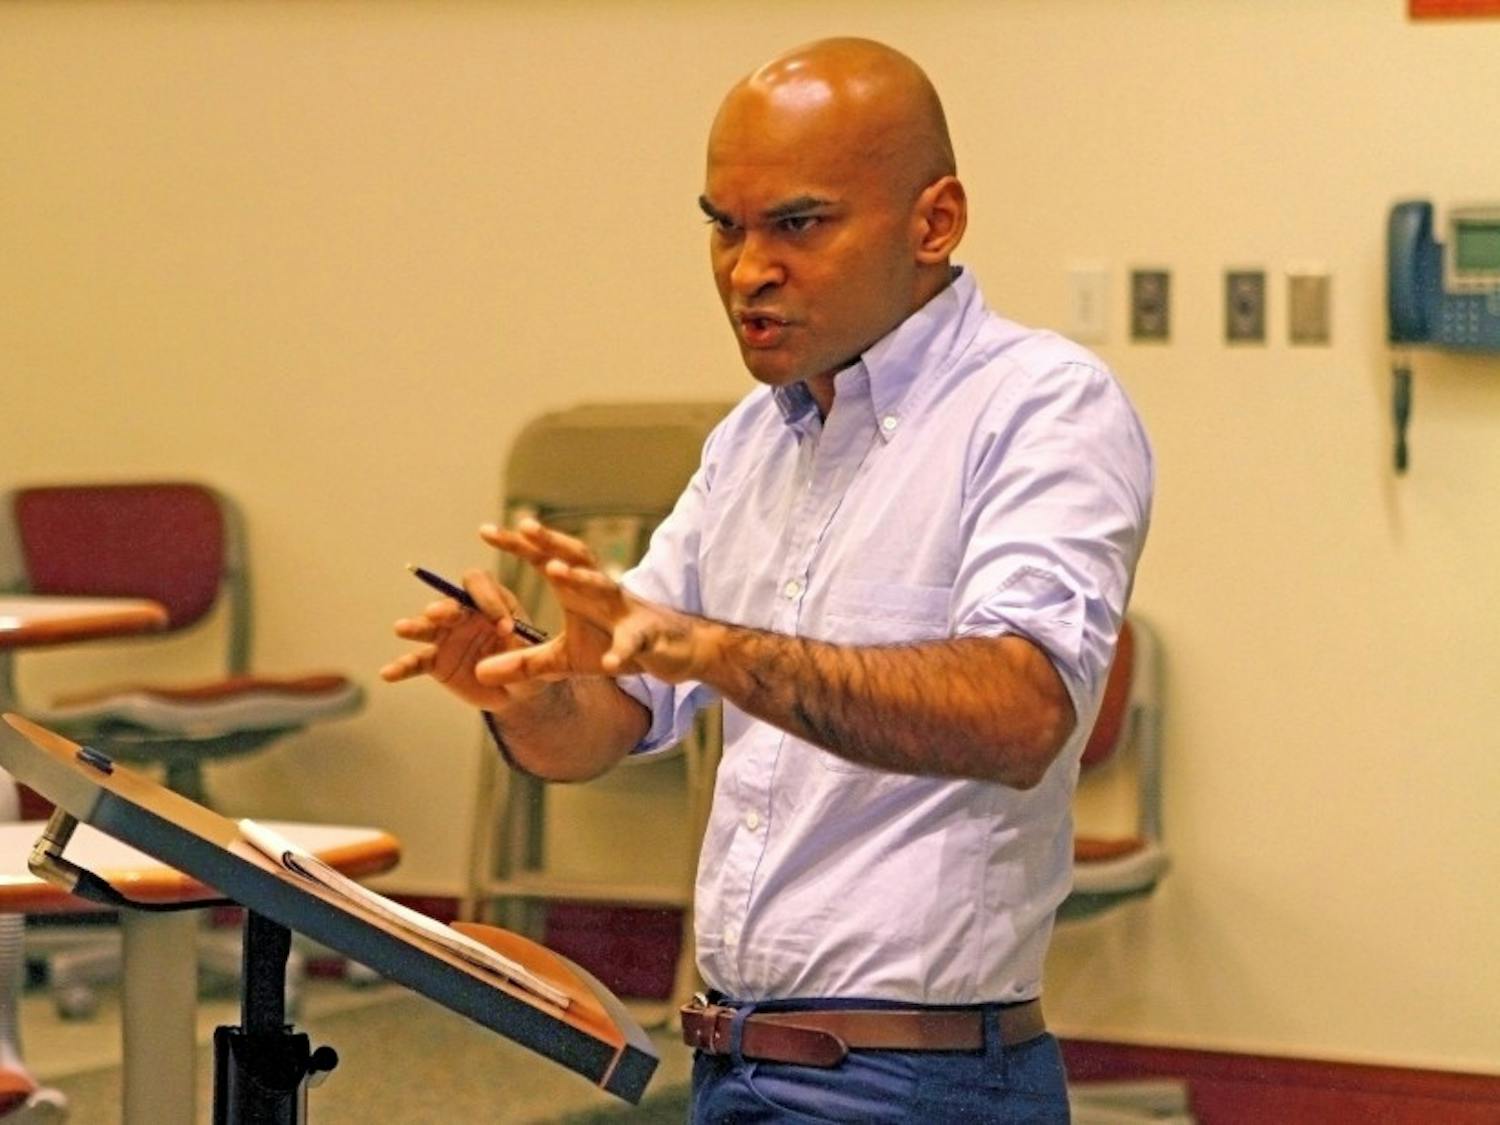 Political commentator Reihan Salam discussed the need to change the health care industry during a time of health reform.